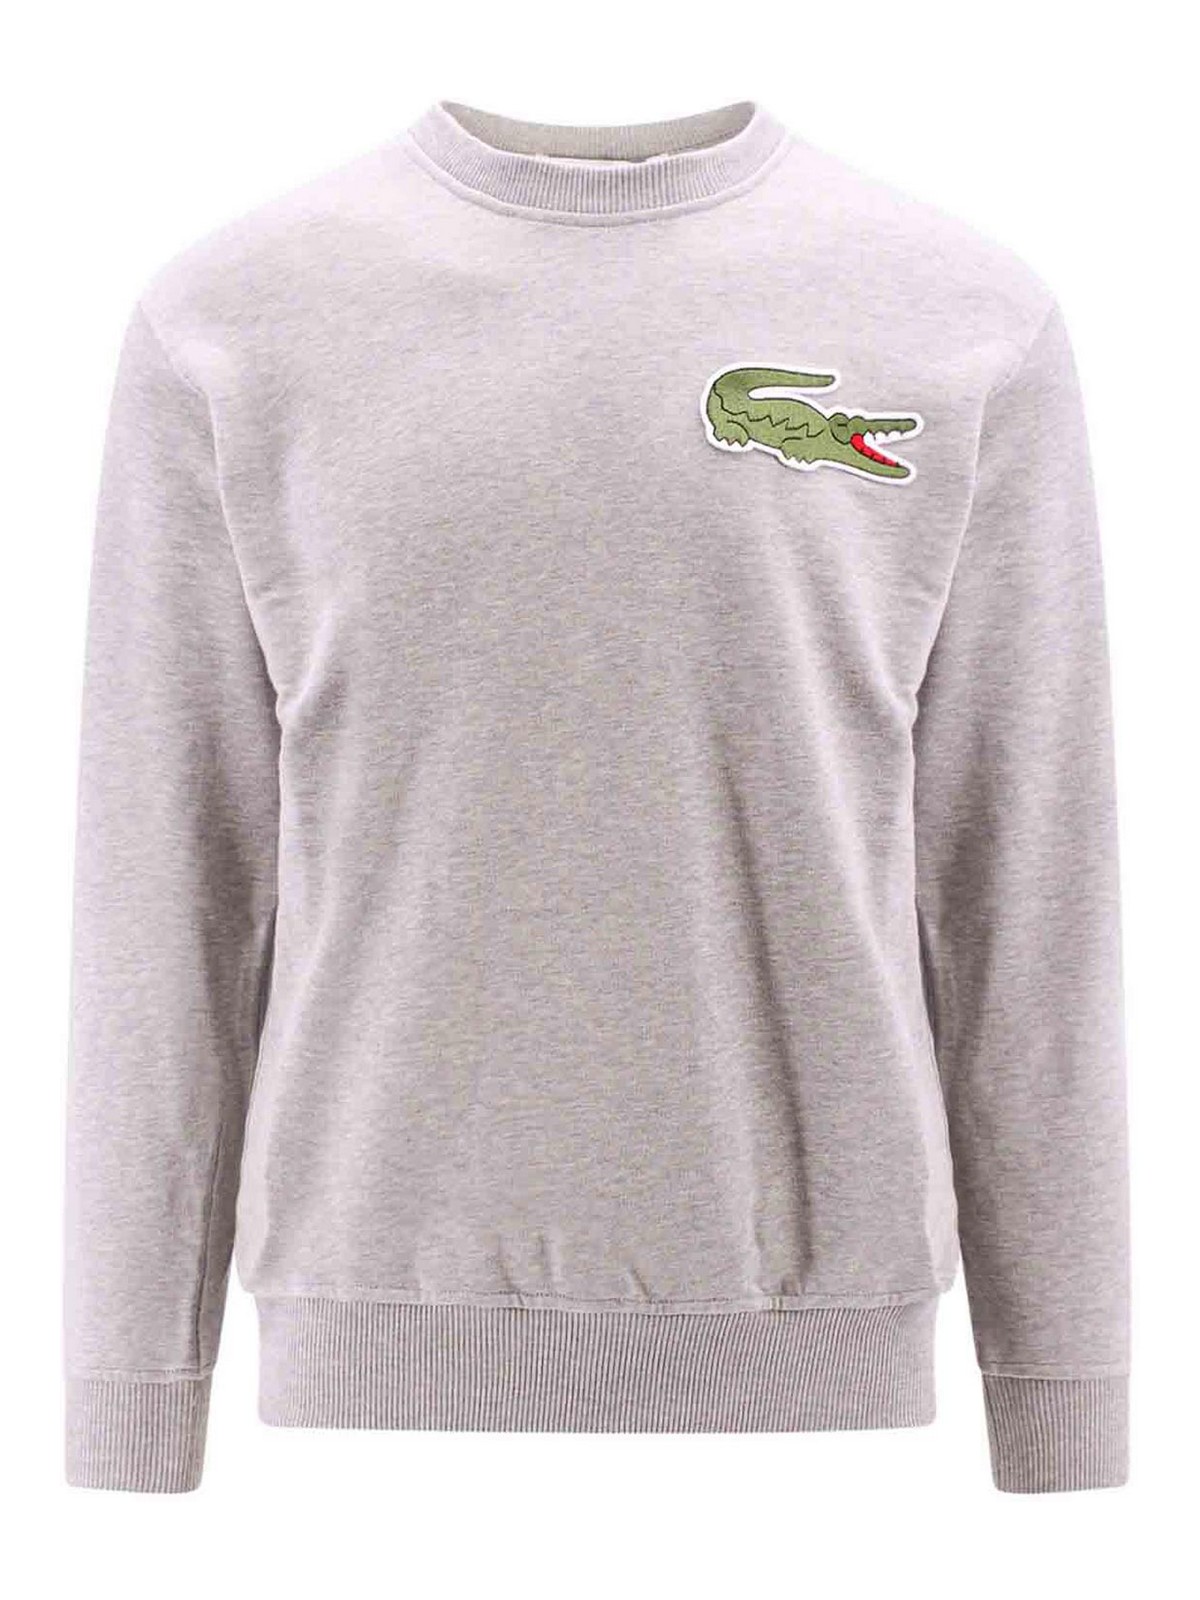 Comme Des Garçons Shirt Cotton Sweatshirt With Frontal Lacoste Patch In Grey